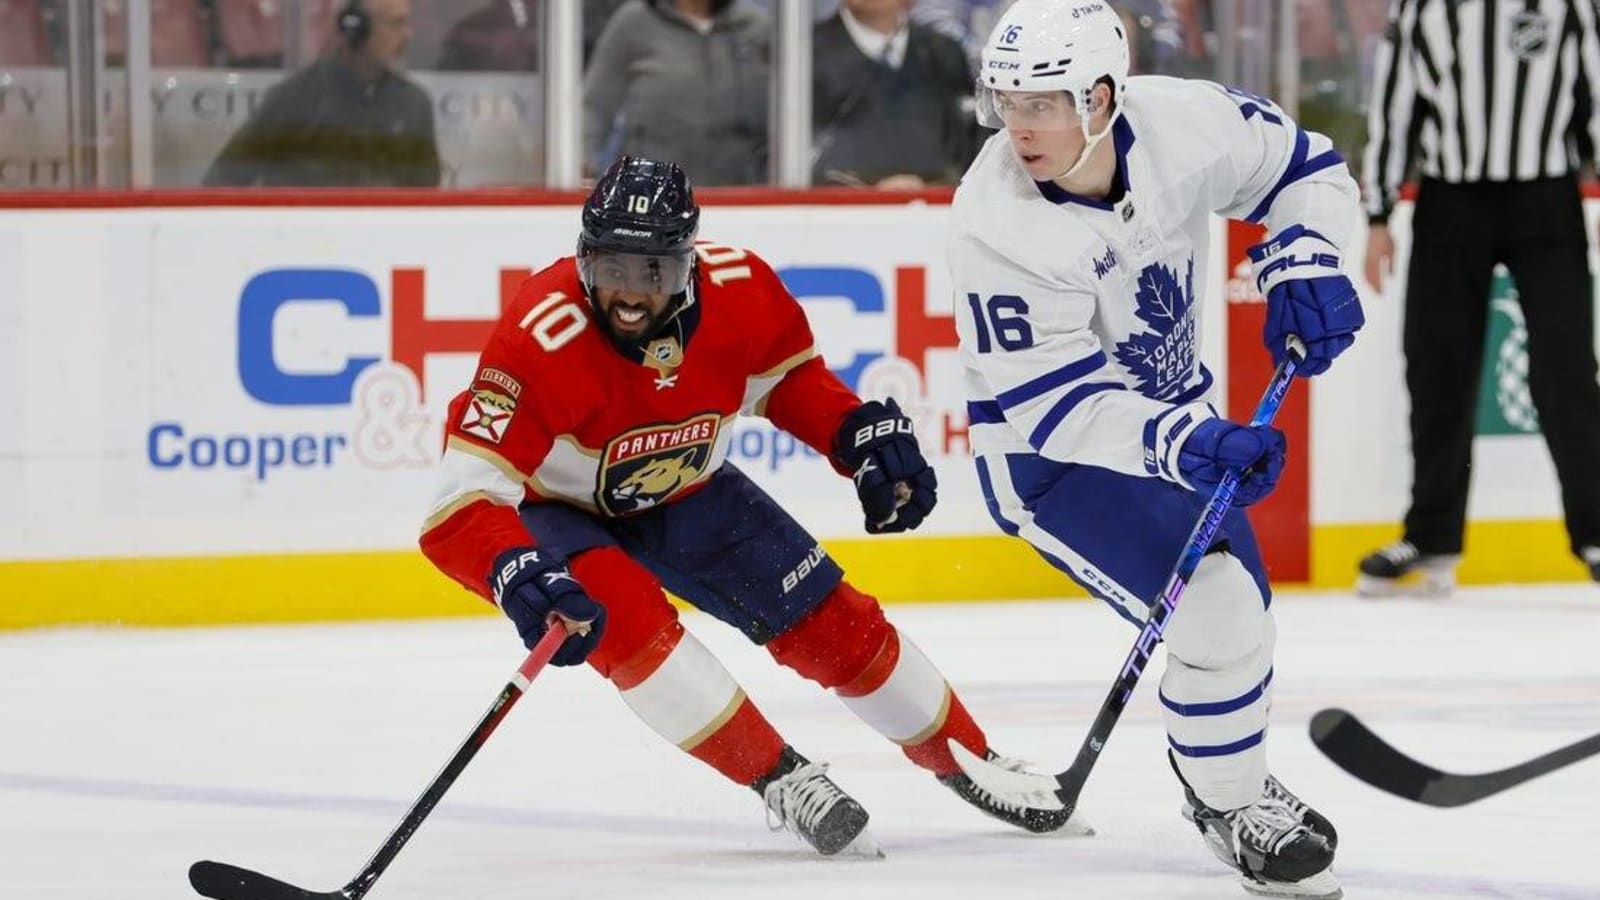 John Tavares lifts Maple Leafs past Panthers in OT